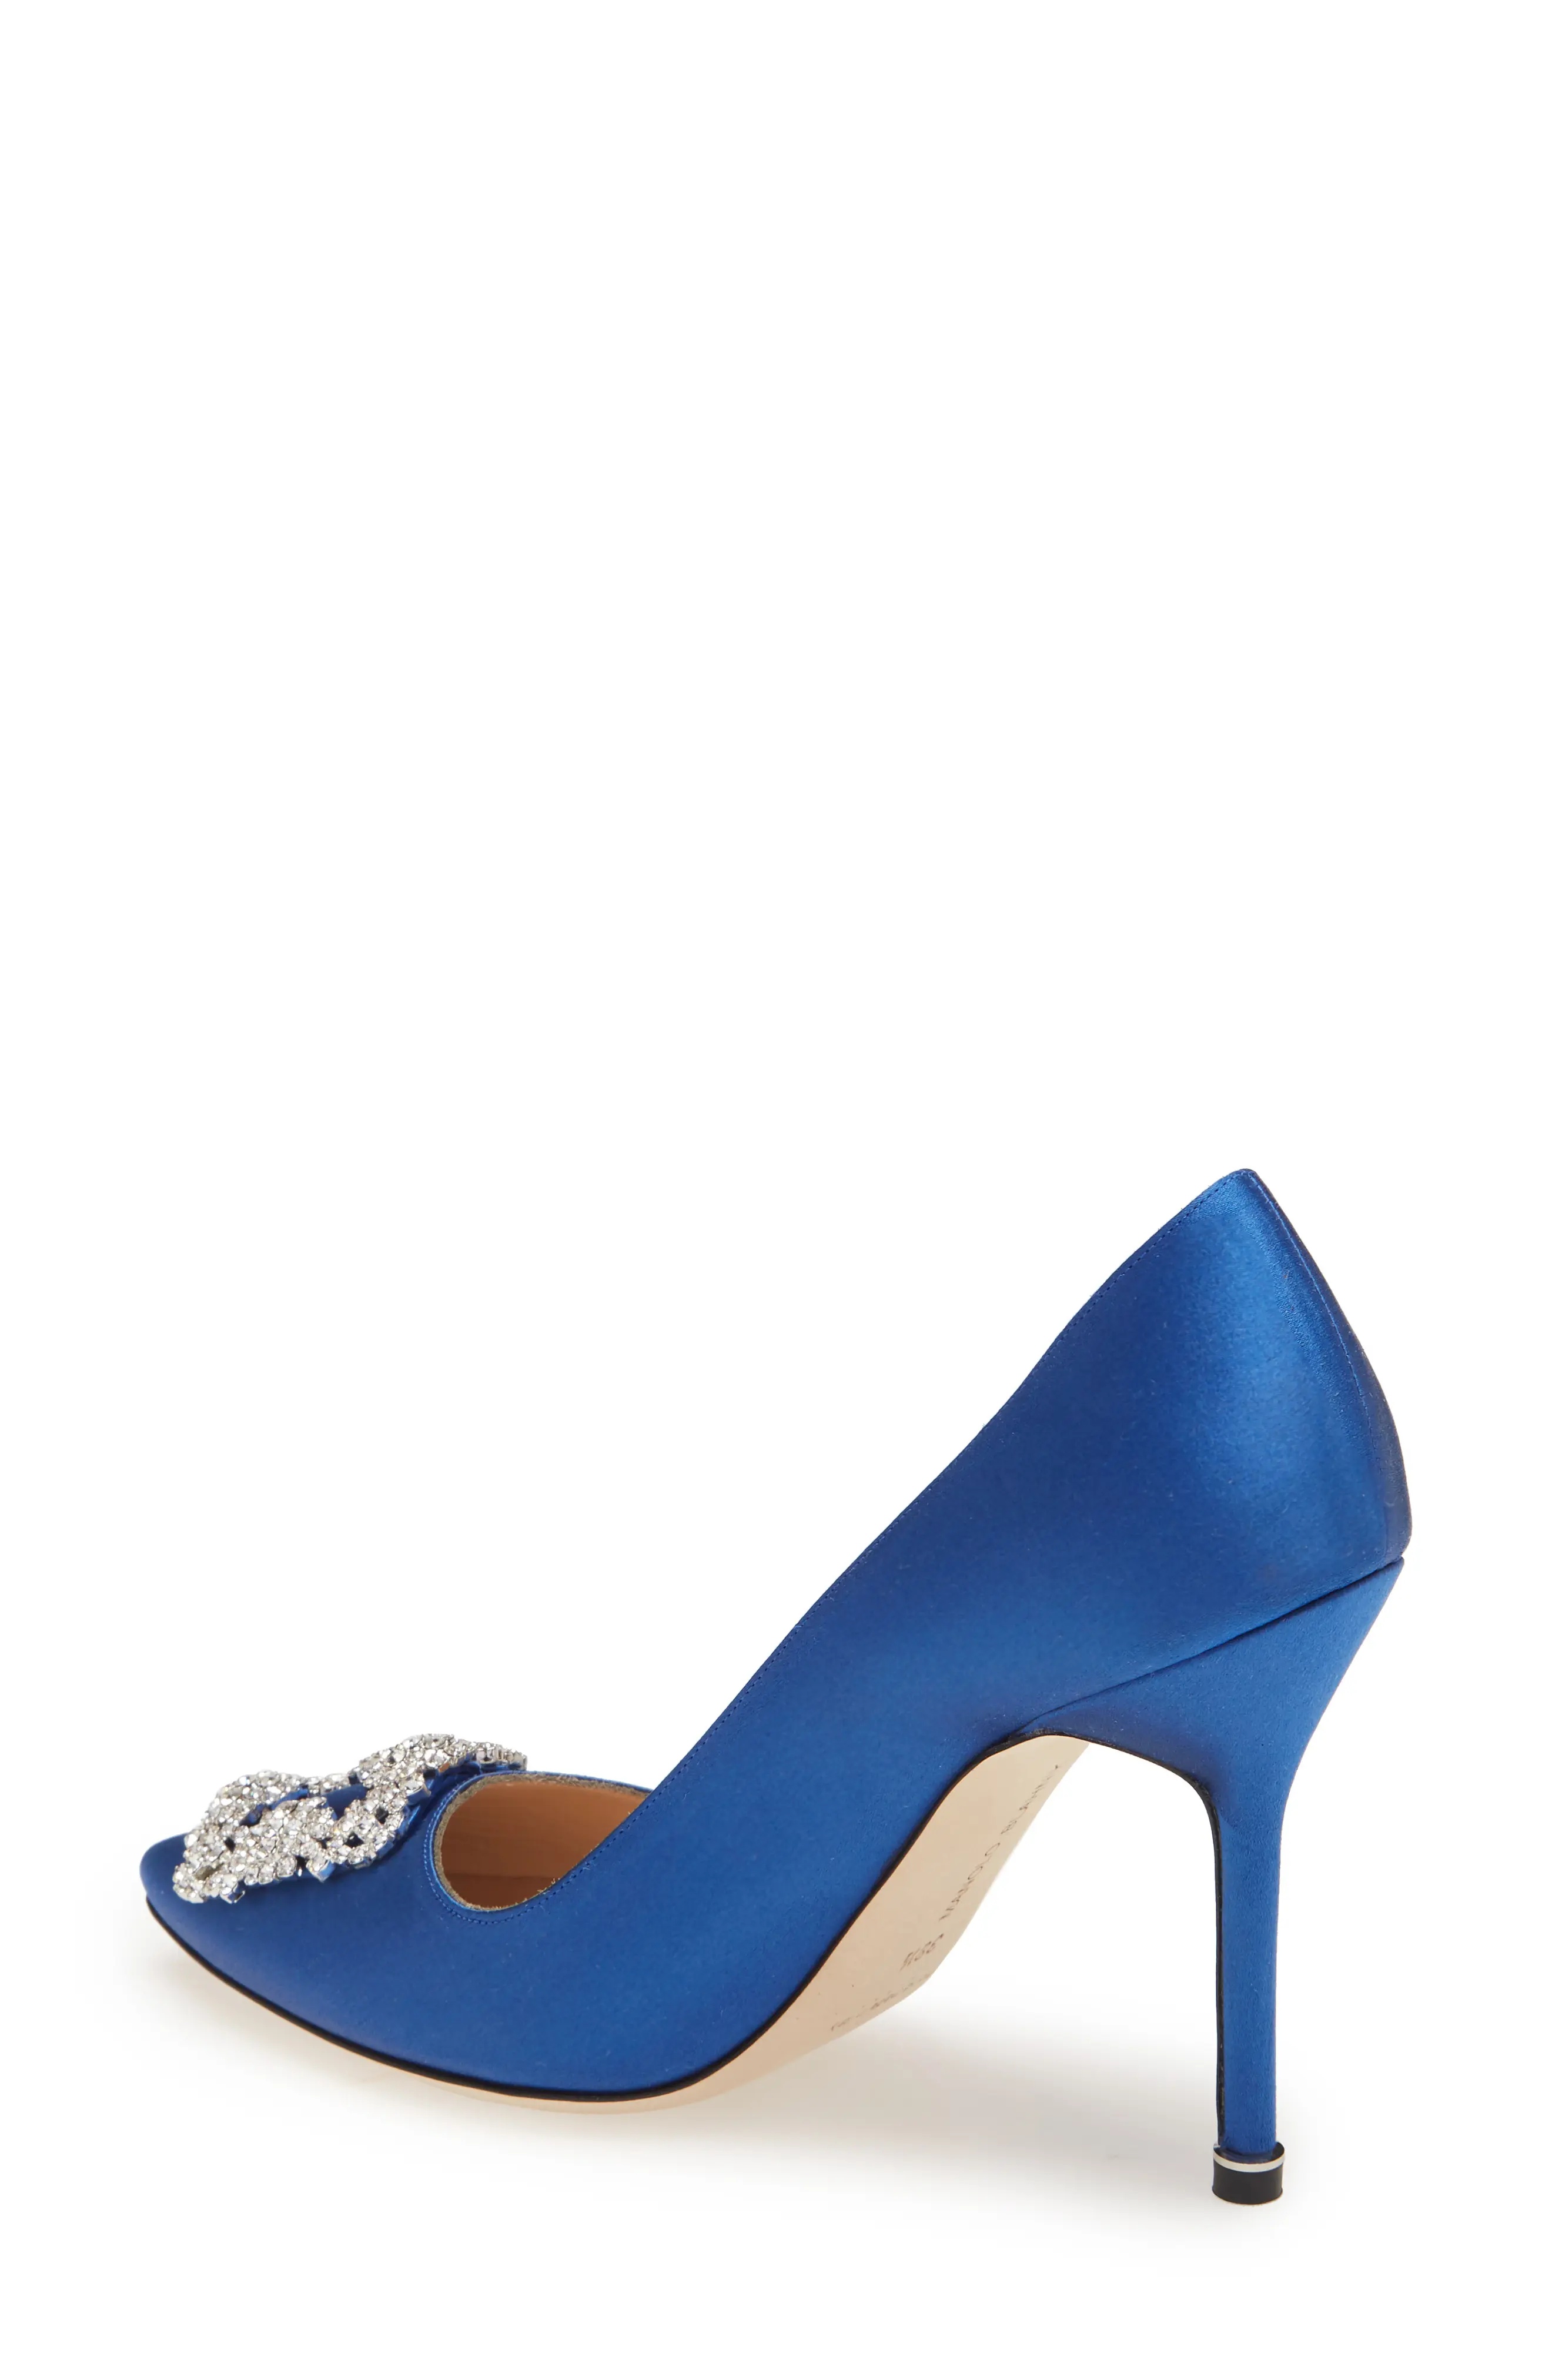 Hangisi Pointed Toe Pump in Blue Satin/Clear - 2